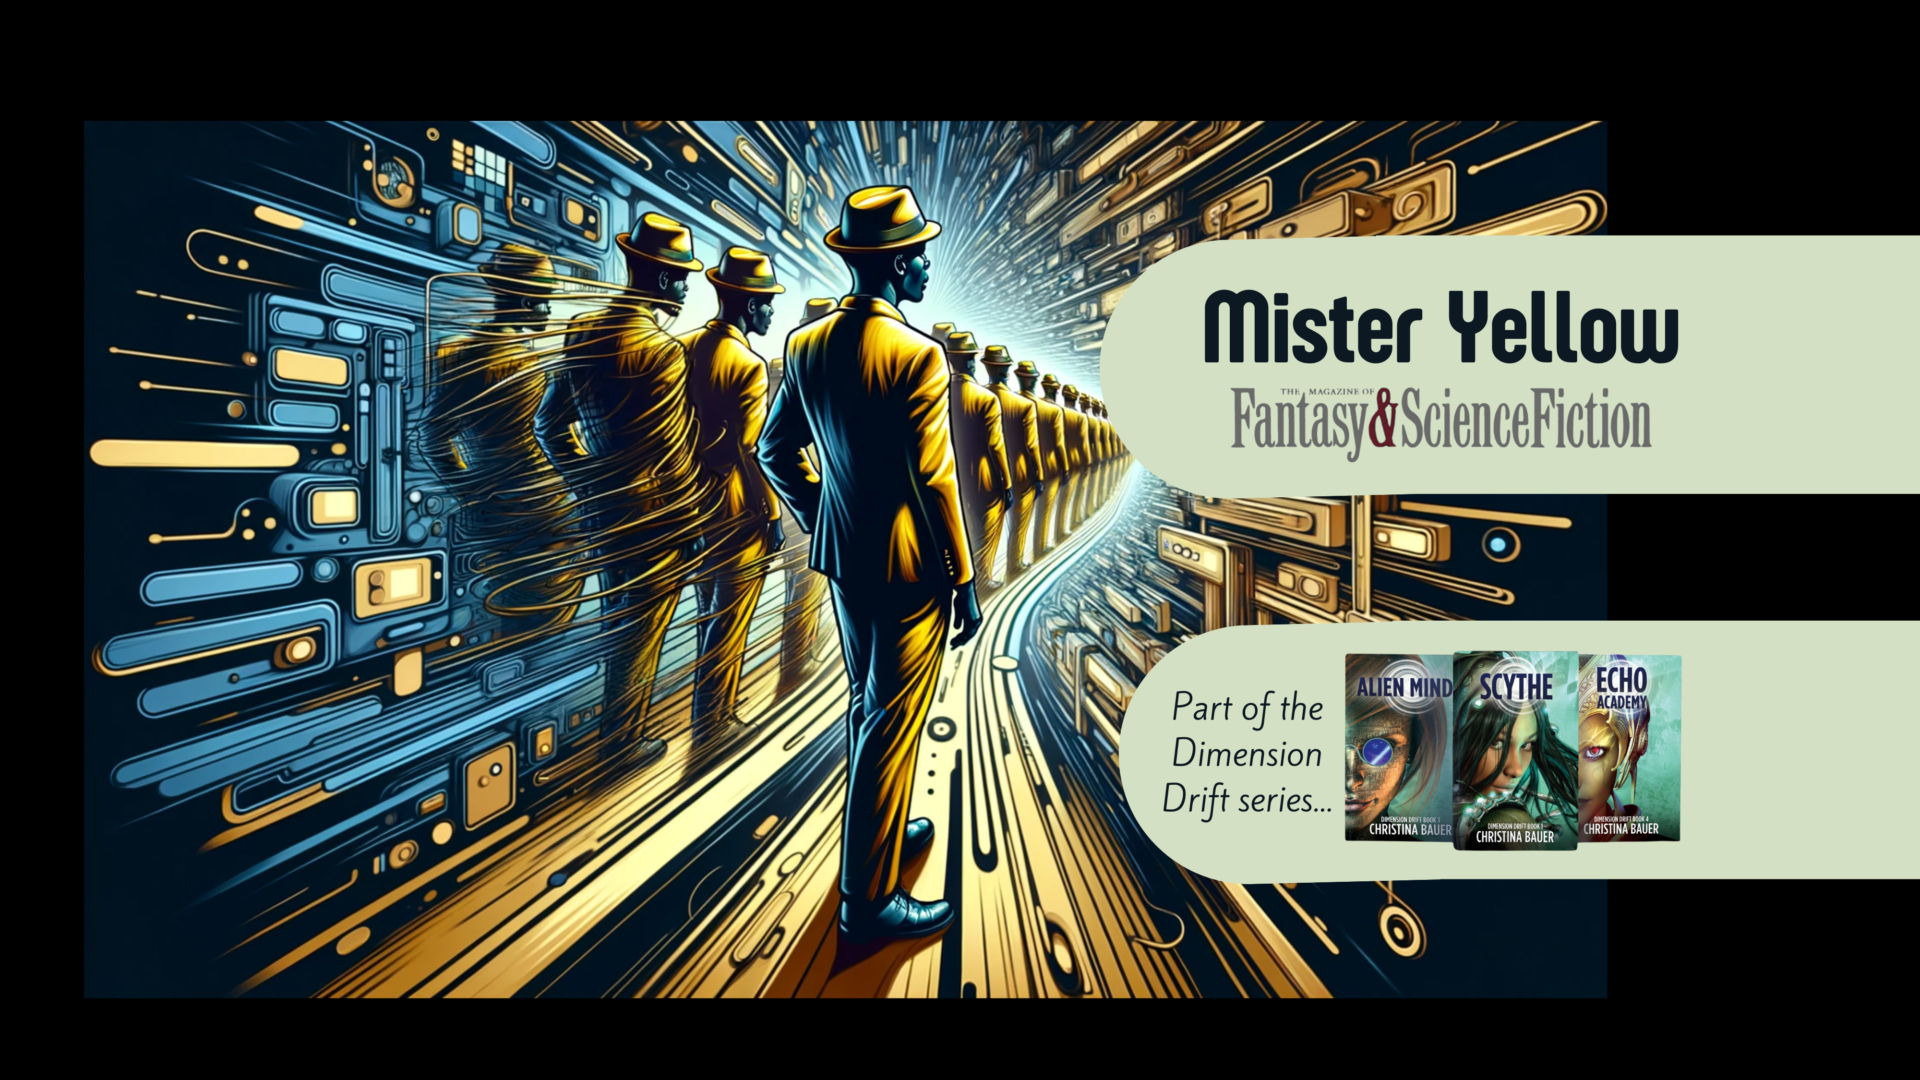 Coming Soon -- Mister Yellow!